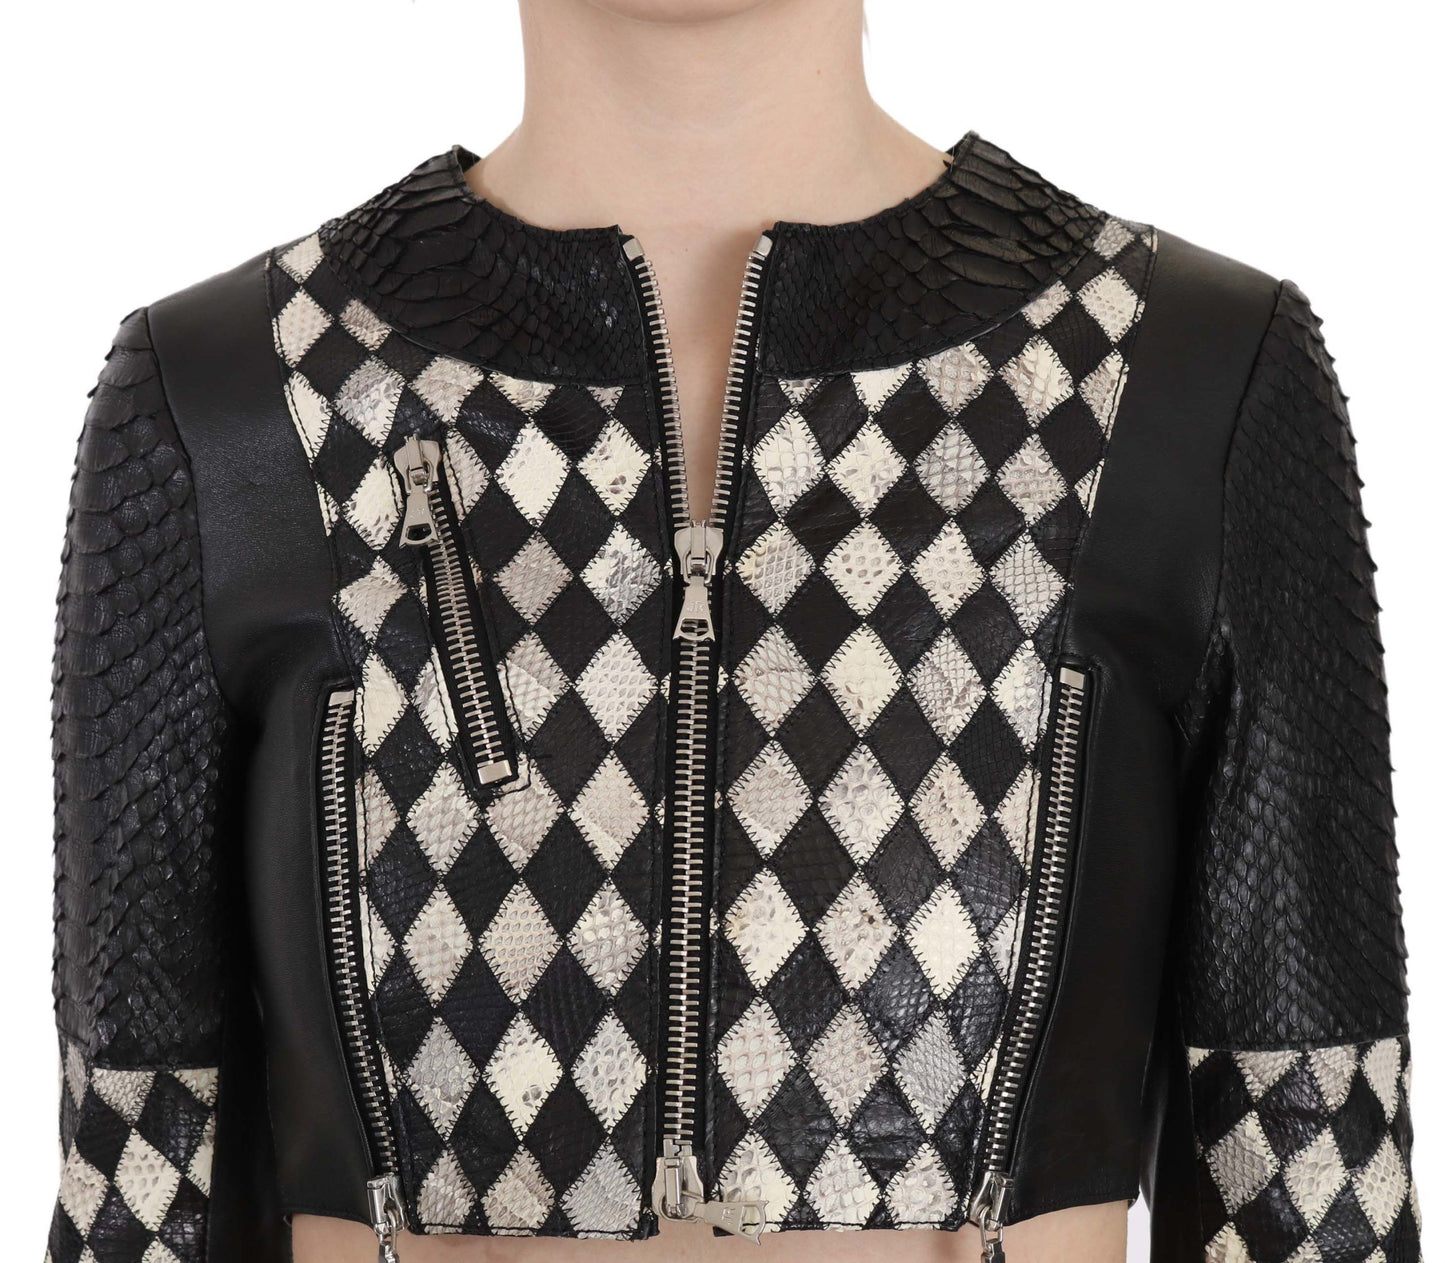 Chic Biker-Inspired Cropped Leather Jacket